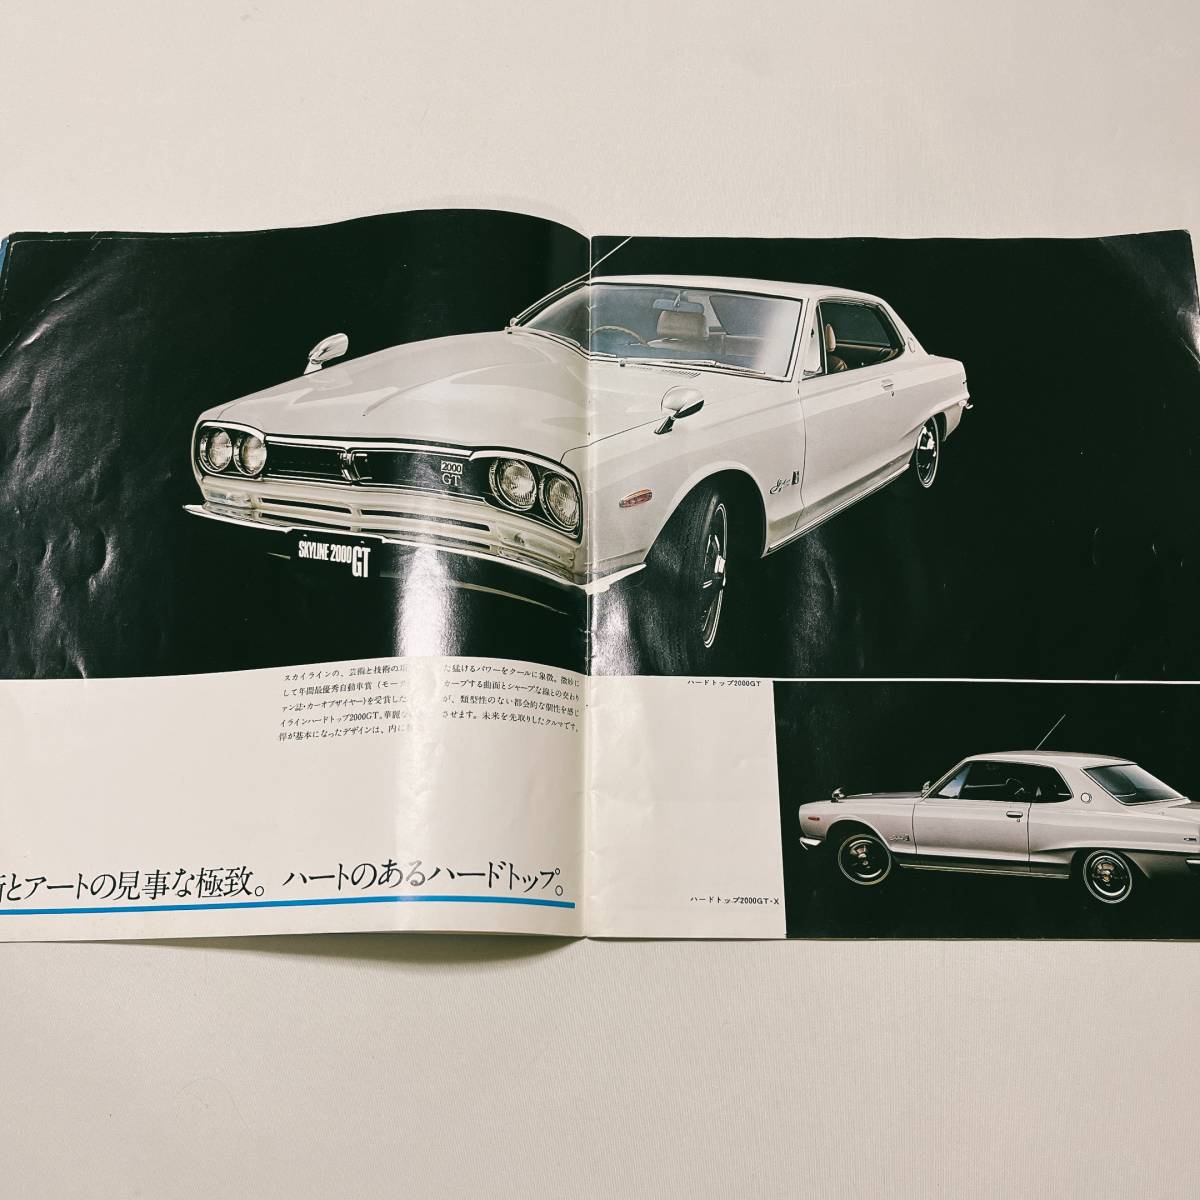  Hakosuka 2000 GT catalog (GTX GT-R contains )24 page 71 year 10 month damage equipped Prince GT-R KPGC10